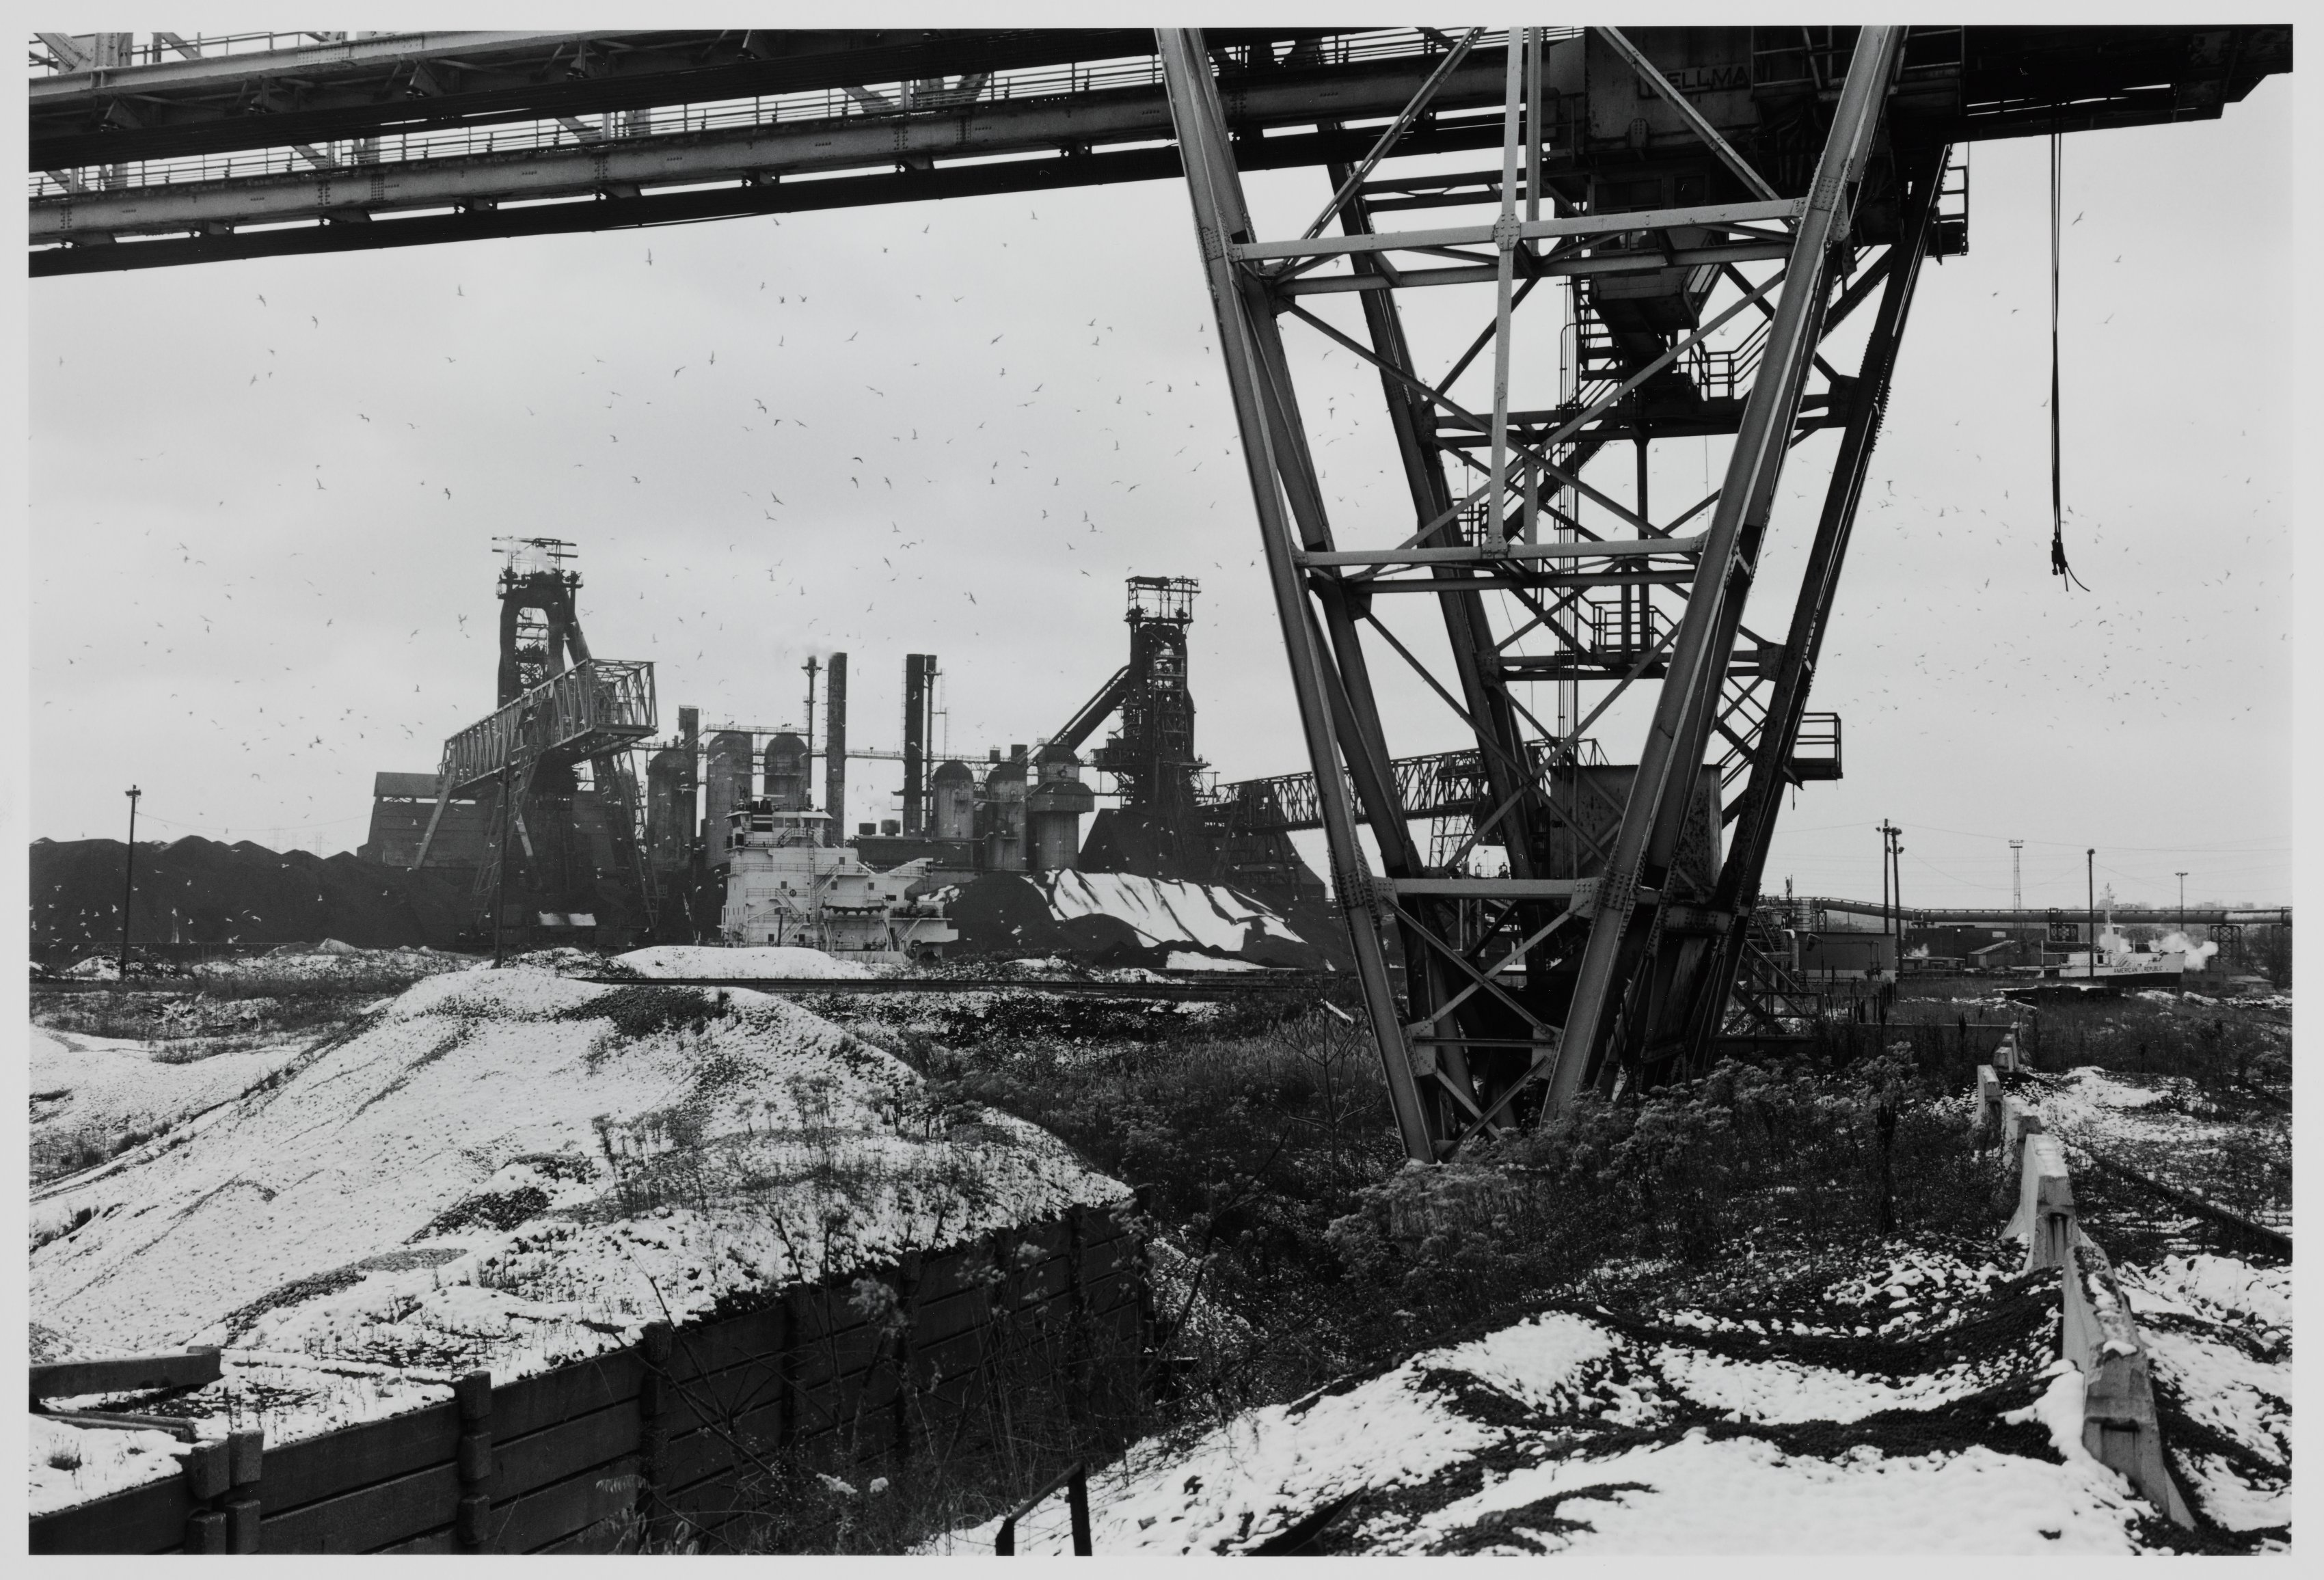 ISG Blast Furnaces #5 and #6